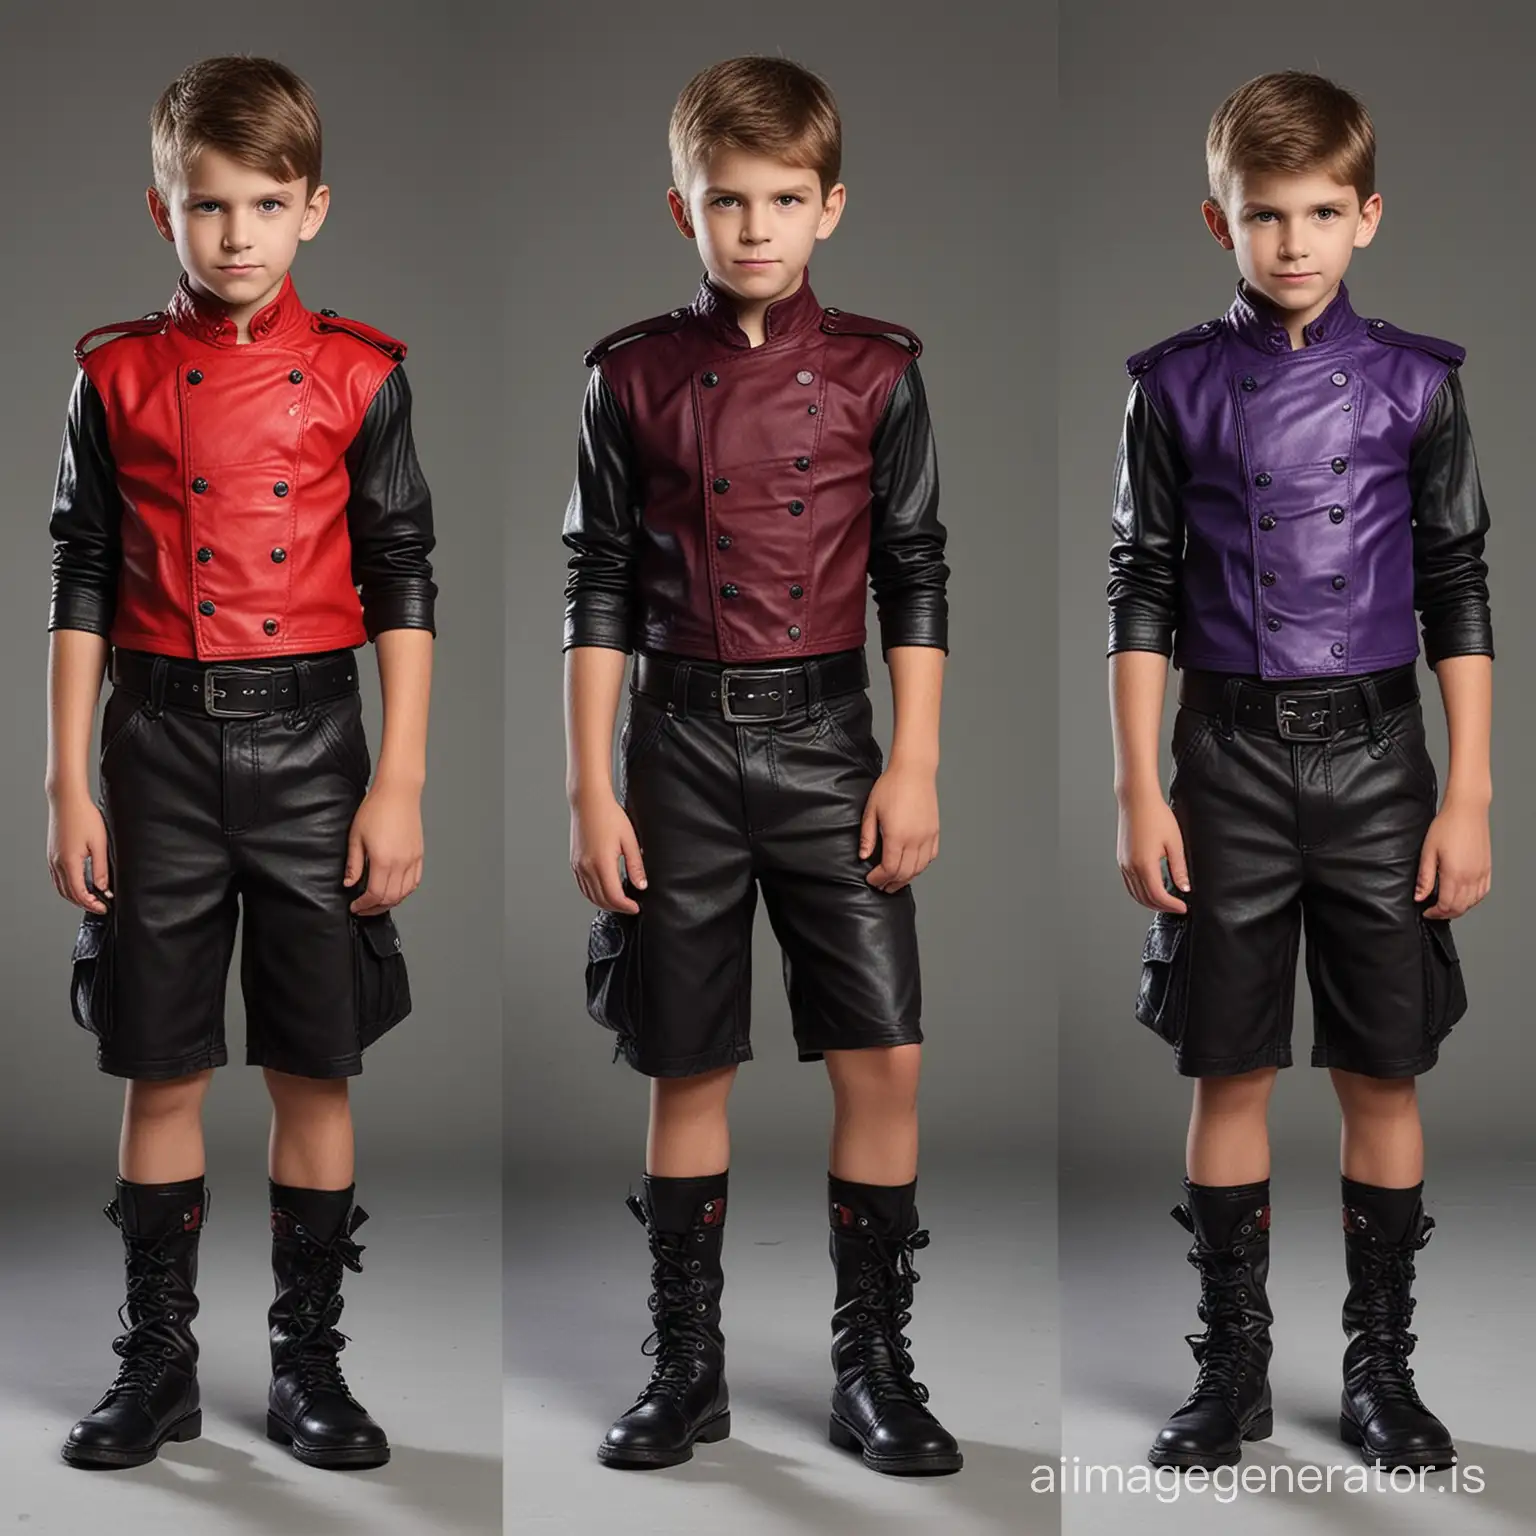 Create a villain outfit for a strong 8 year old boy villain with abs, cool, wicked, comfortable yet intimidating, leather, shorts, various shades of purple and red with hints of green and black